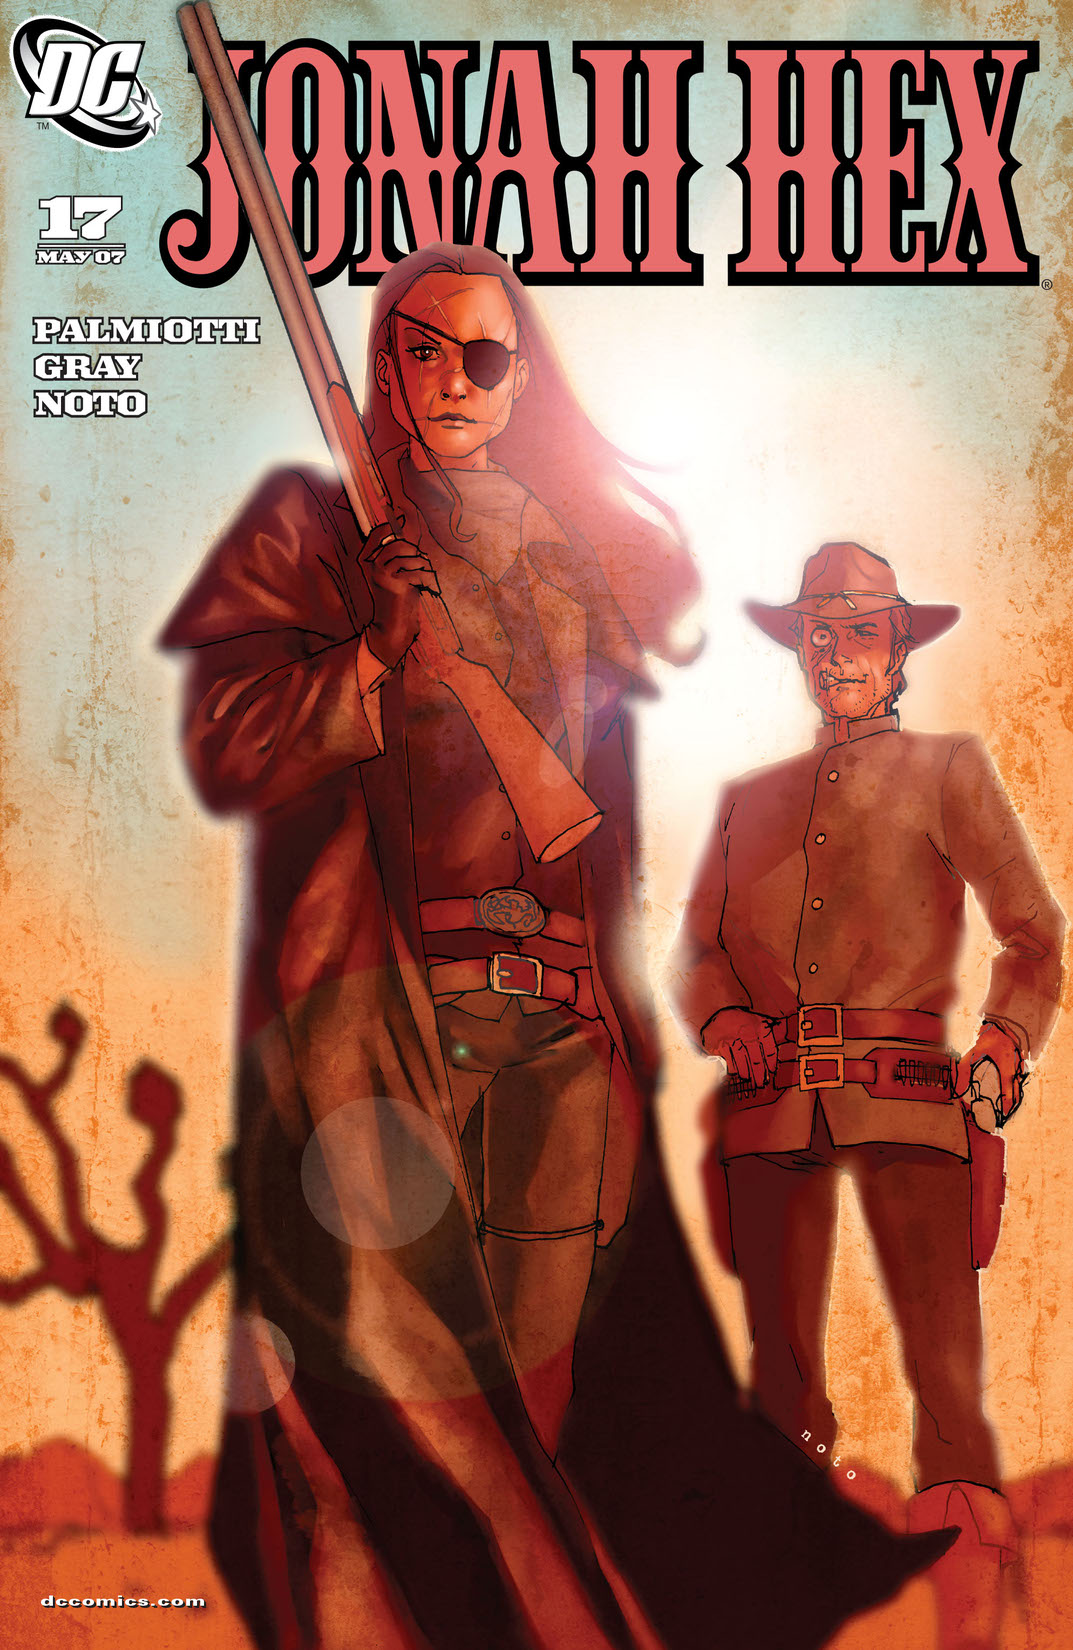 Jonah Hex #17 preview images